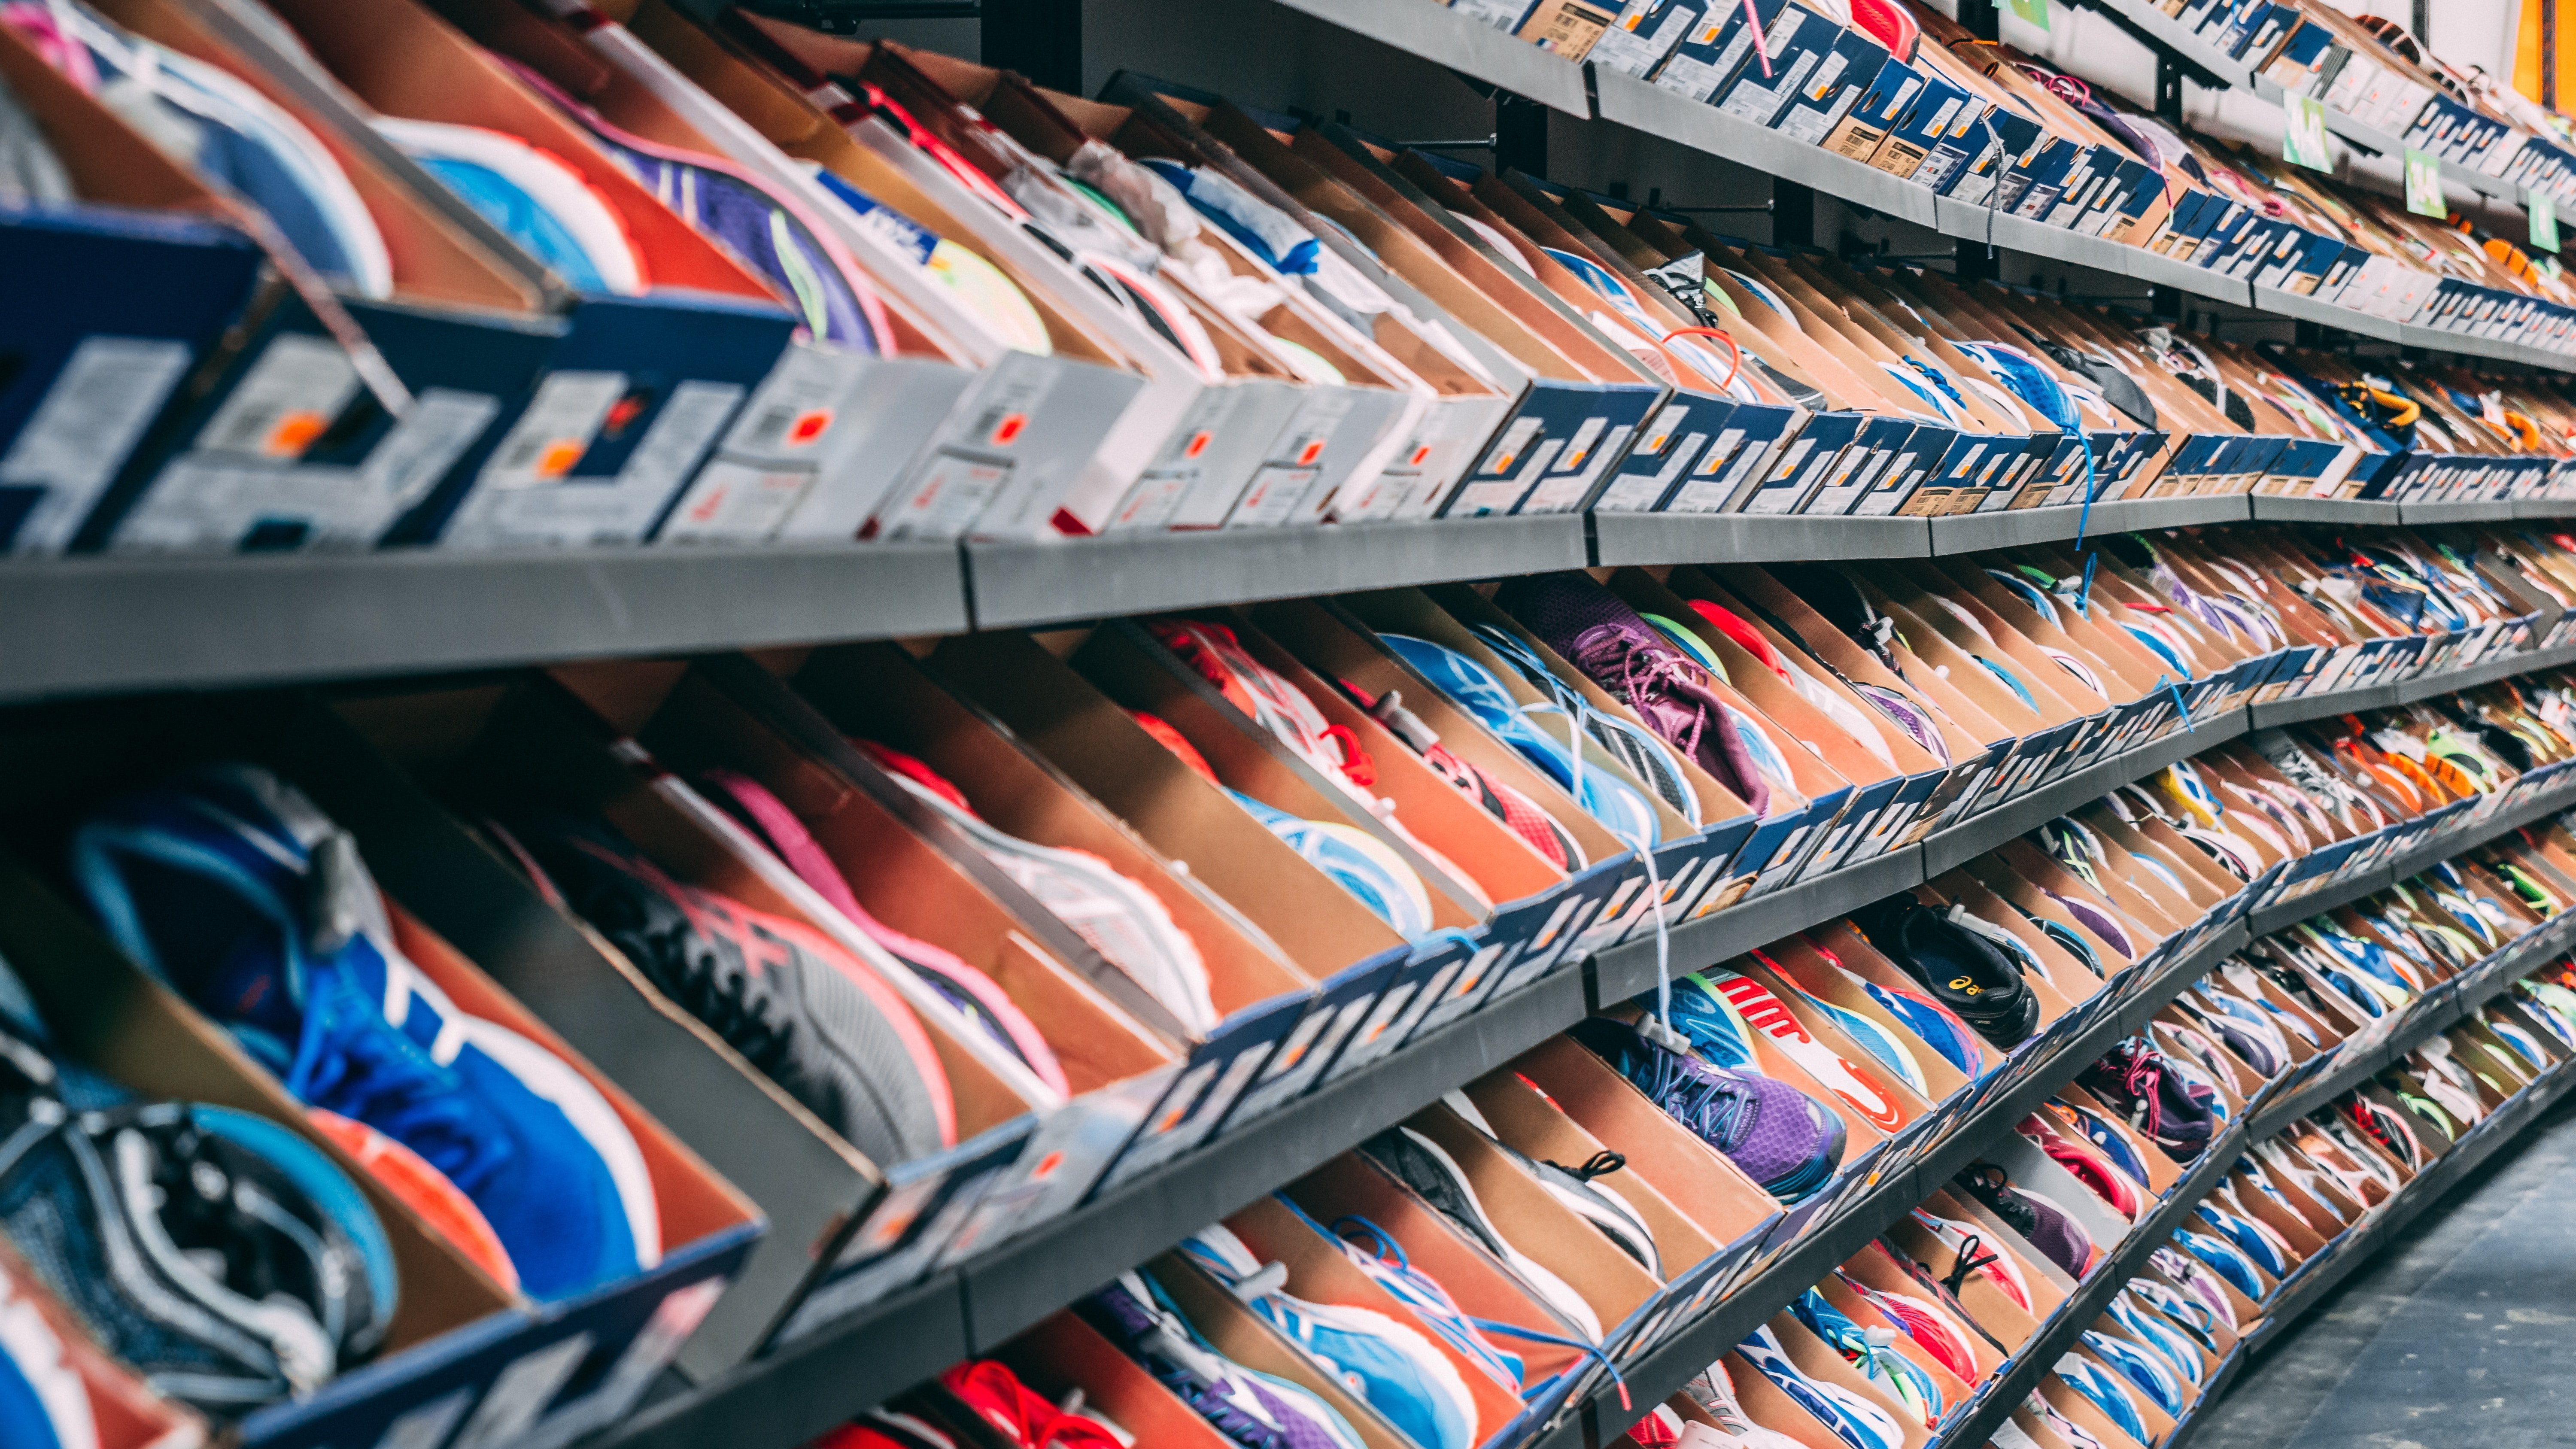 Shoes lined up in a store. | Source: Unsplash